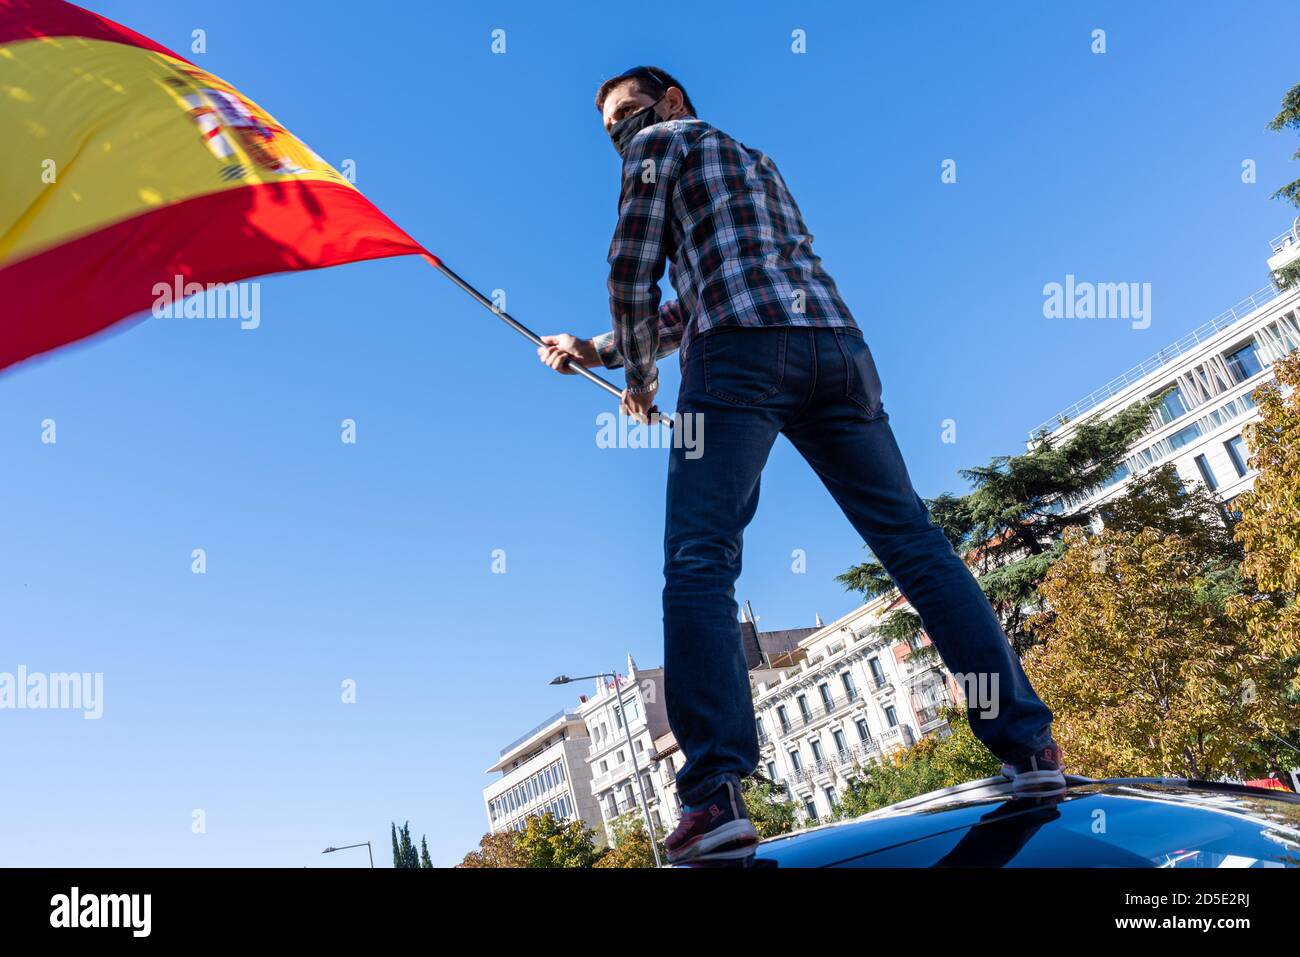 Madrid, Spain, 12th oct 2020.  Man wearing mask waving flag as he attends a protest against Spanish government's handling of the COVID-19 crisis. Stock Photo